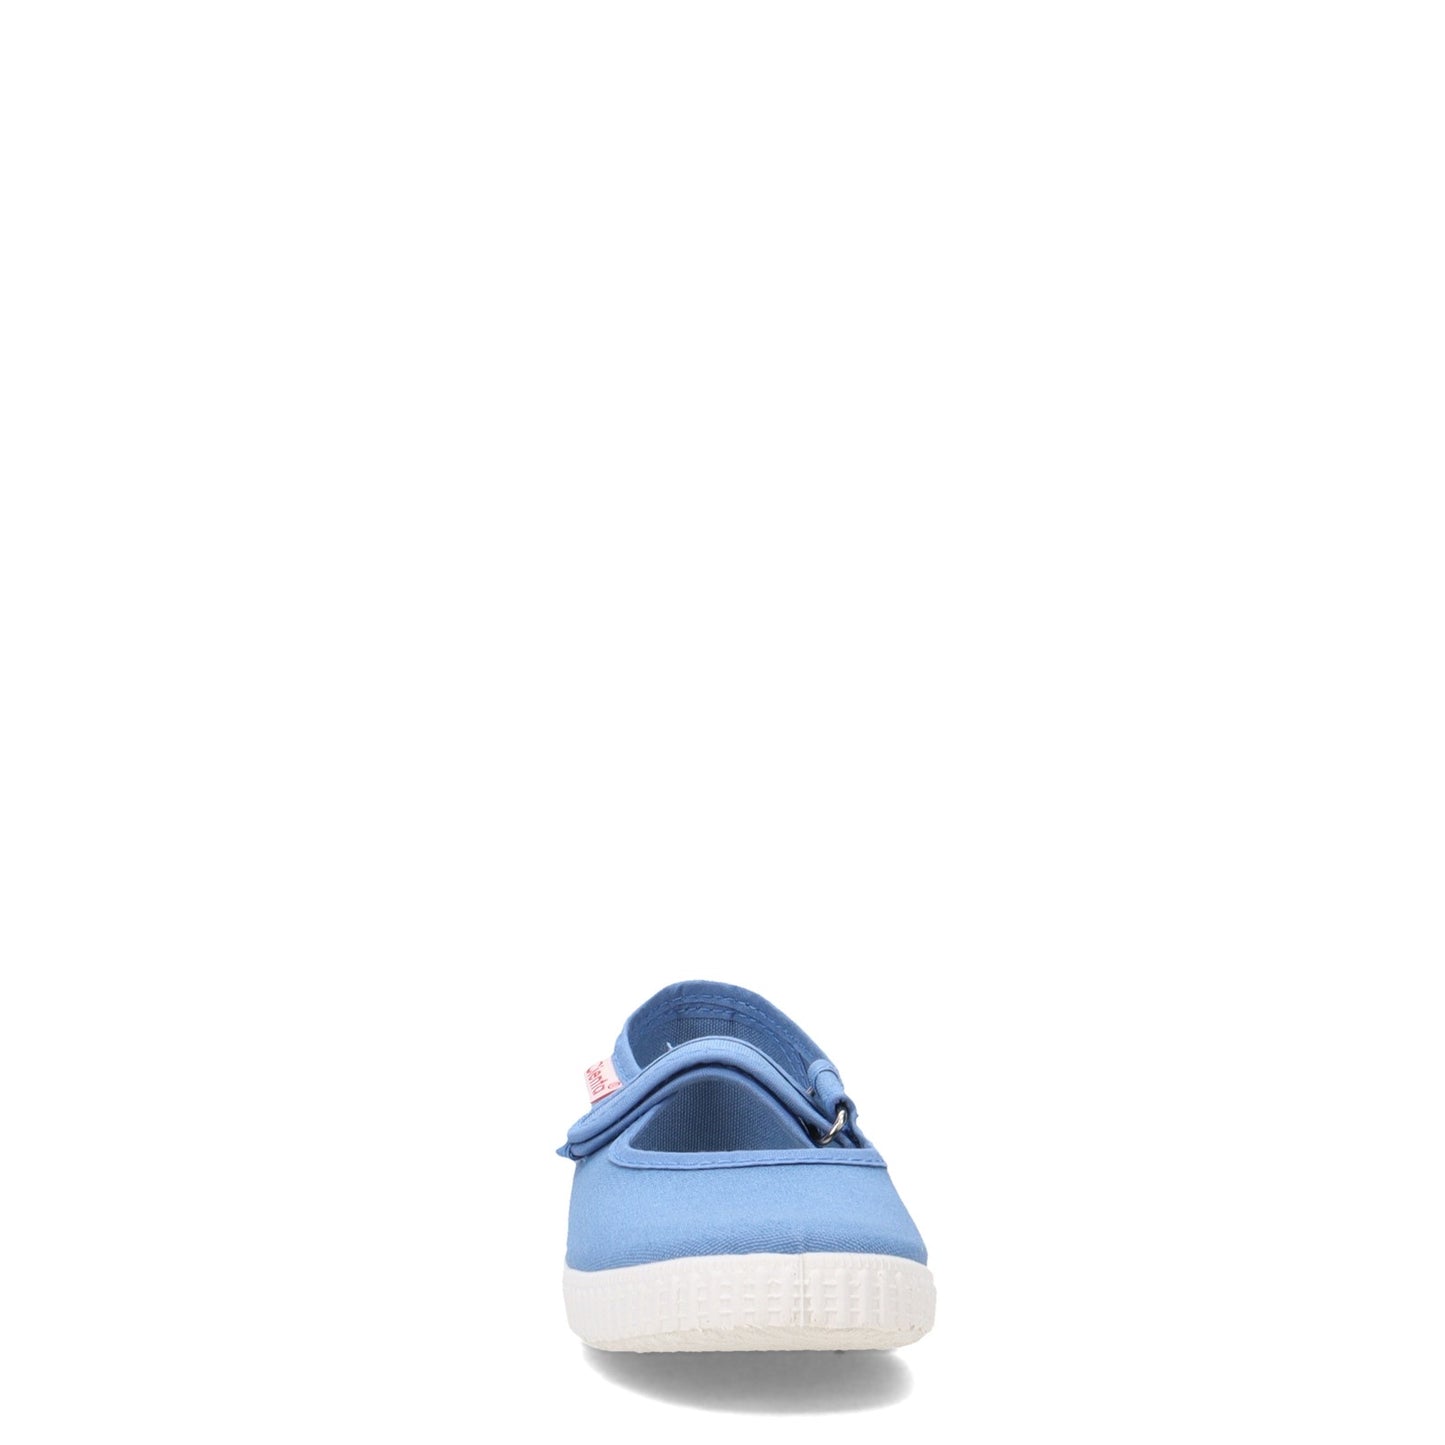 Peltz Shoes  Girl's Cienta Canvas Mary Jane Sneaker - Toddler & Little Kid FRENCH BLUE 56000.90